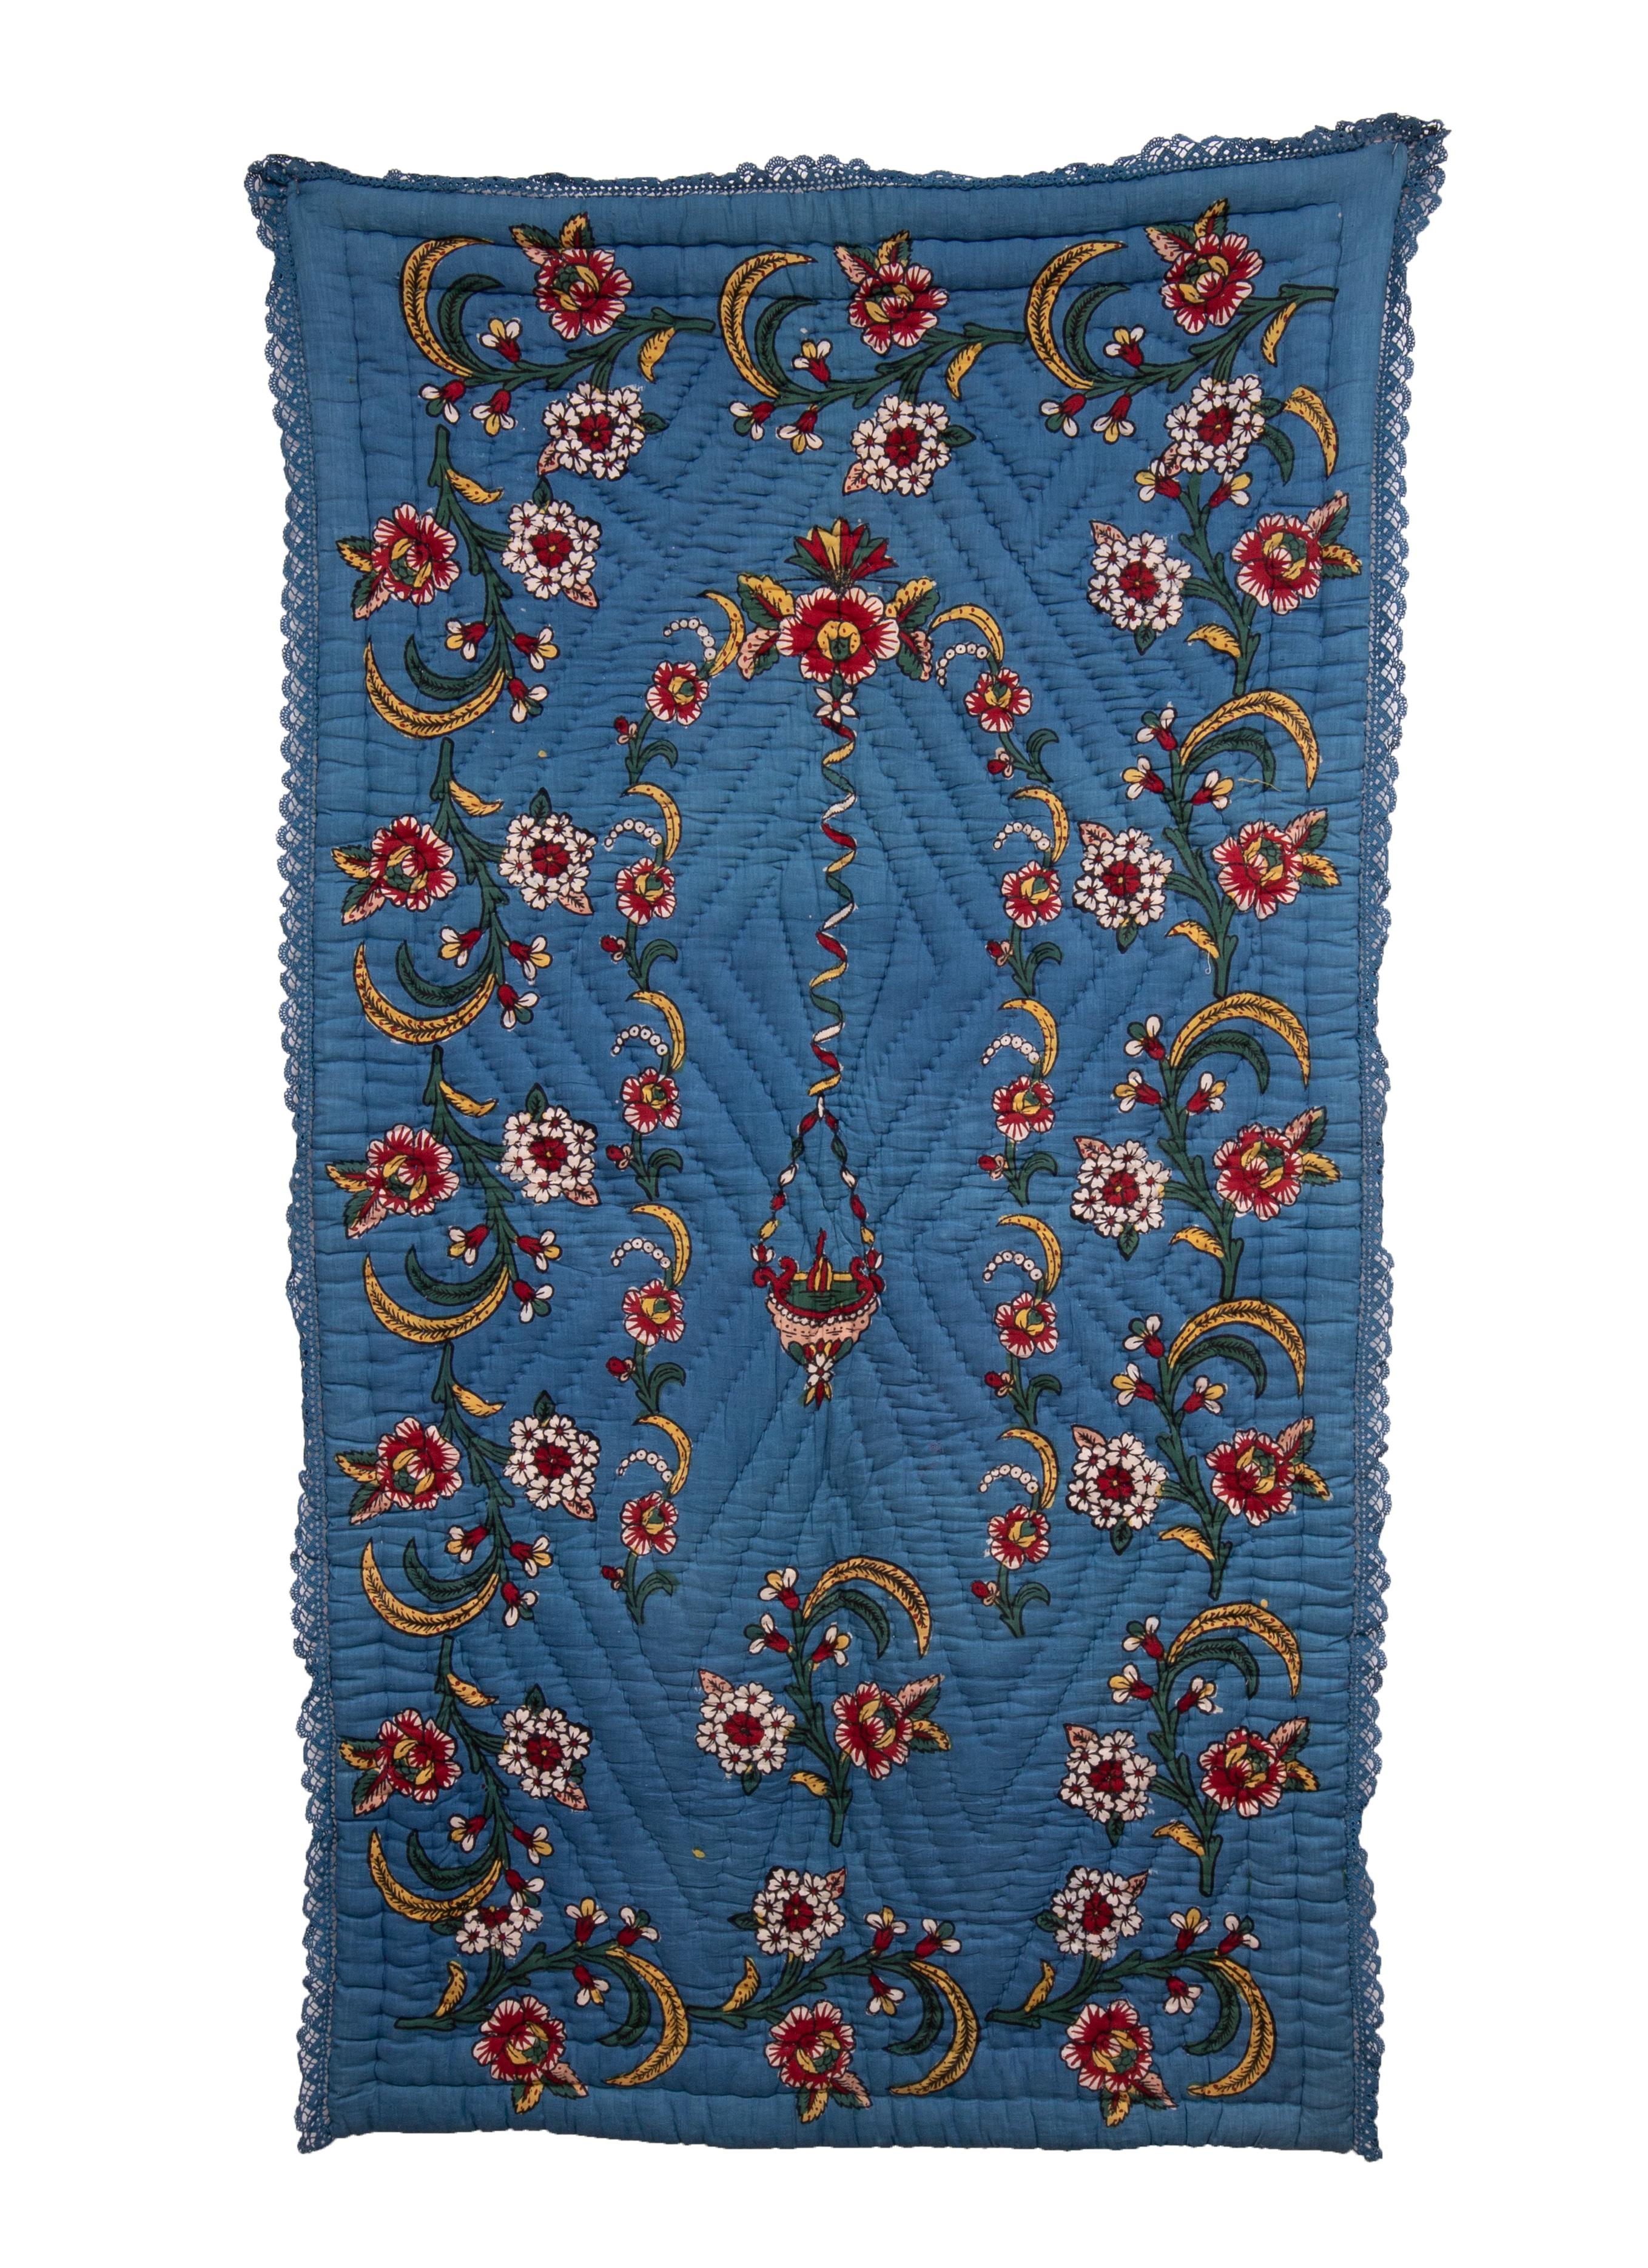 Hand Block printing is one of the land marks of Western Anatolian material culture. These quilts have been used either as prayer mats of wall hangings.